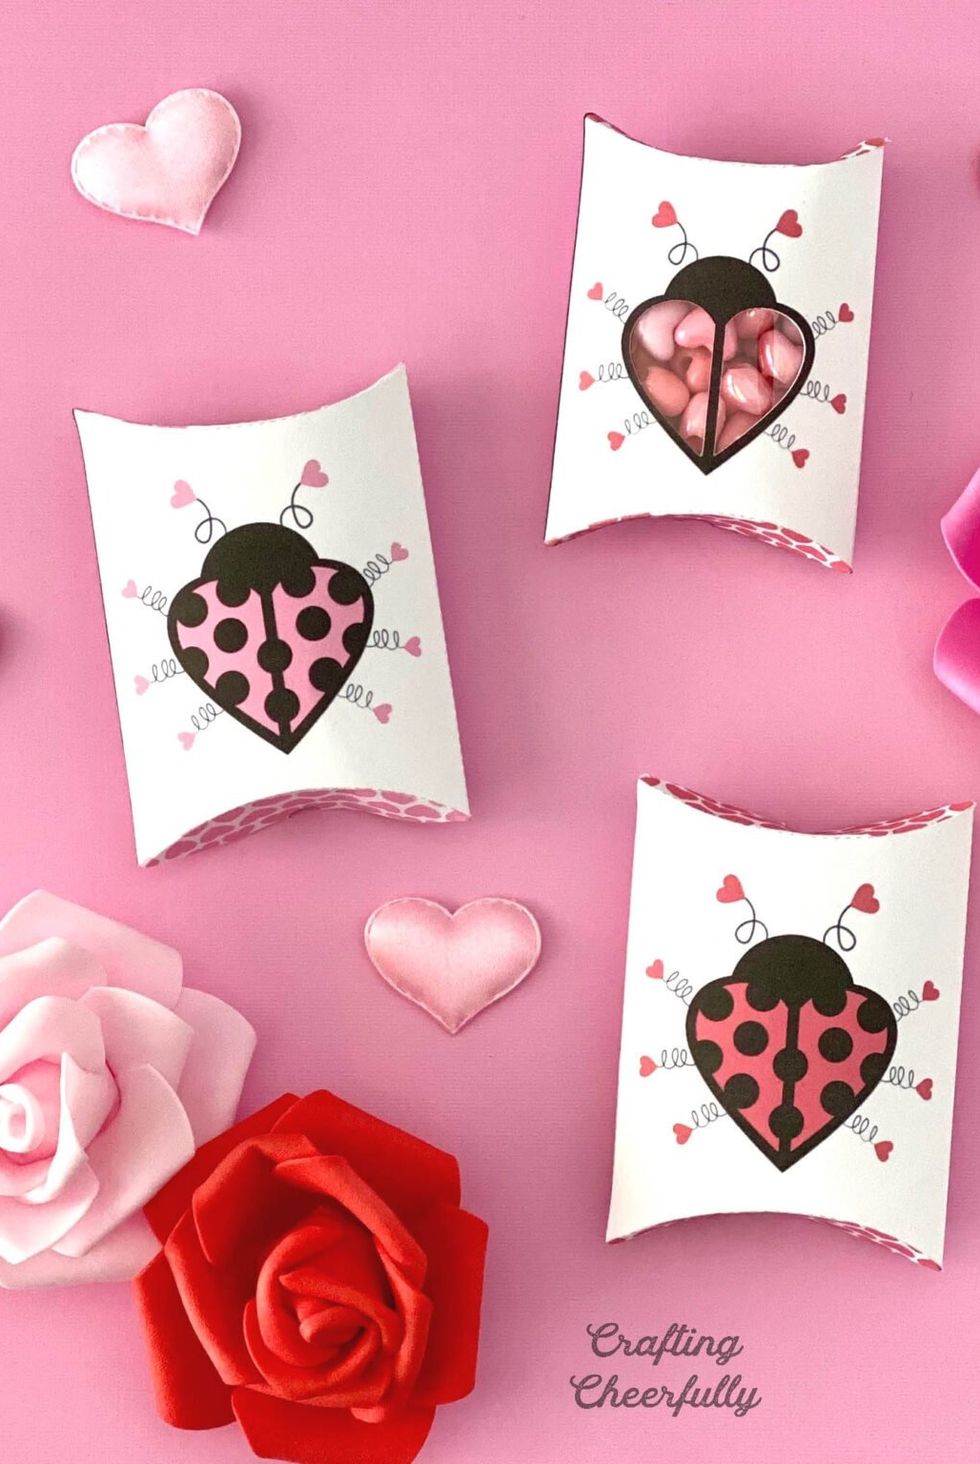 Hot Pink Heart Stickers For Valentine's Day Crafting Scrapbooking 1